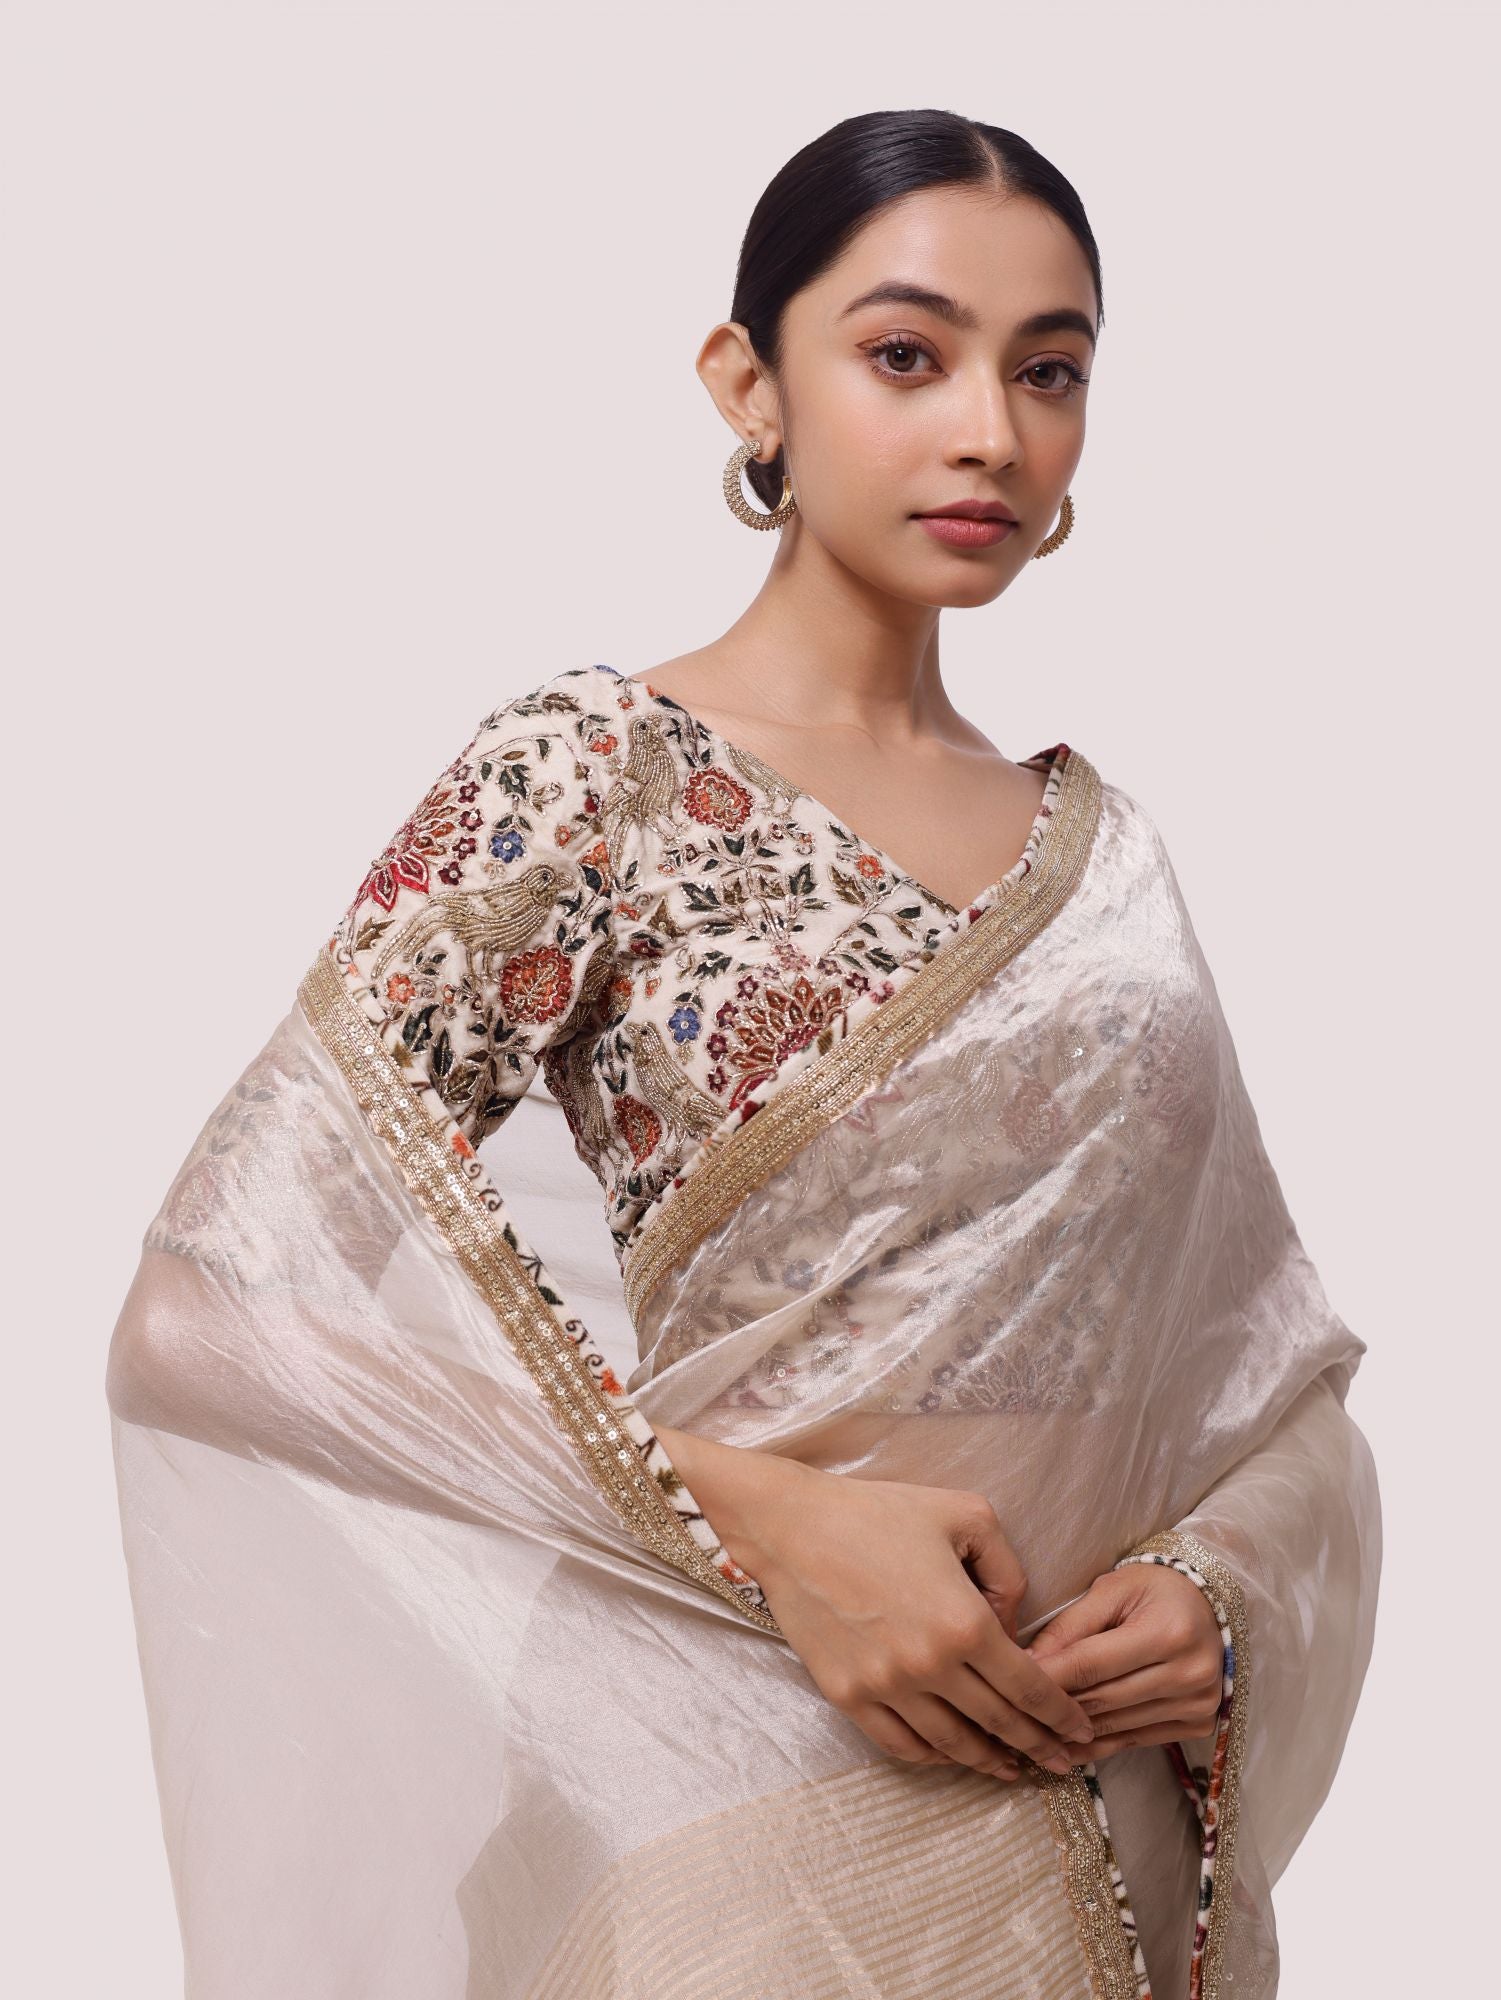 Shop beige handloom tissue saree online in USA with velvet saree blouse. Look your best at parties and weddings in beautiful designer sarees, embroidered sarees, handwoven sarees, silk sarees, organza saris from Pure Elegance Indian saree store in USA.-closeup